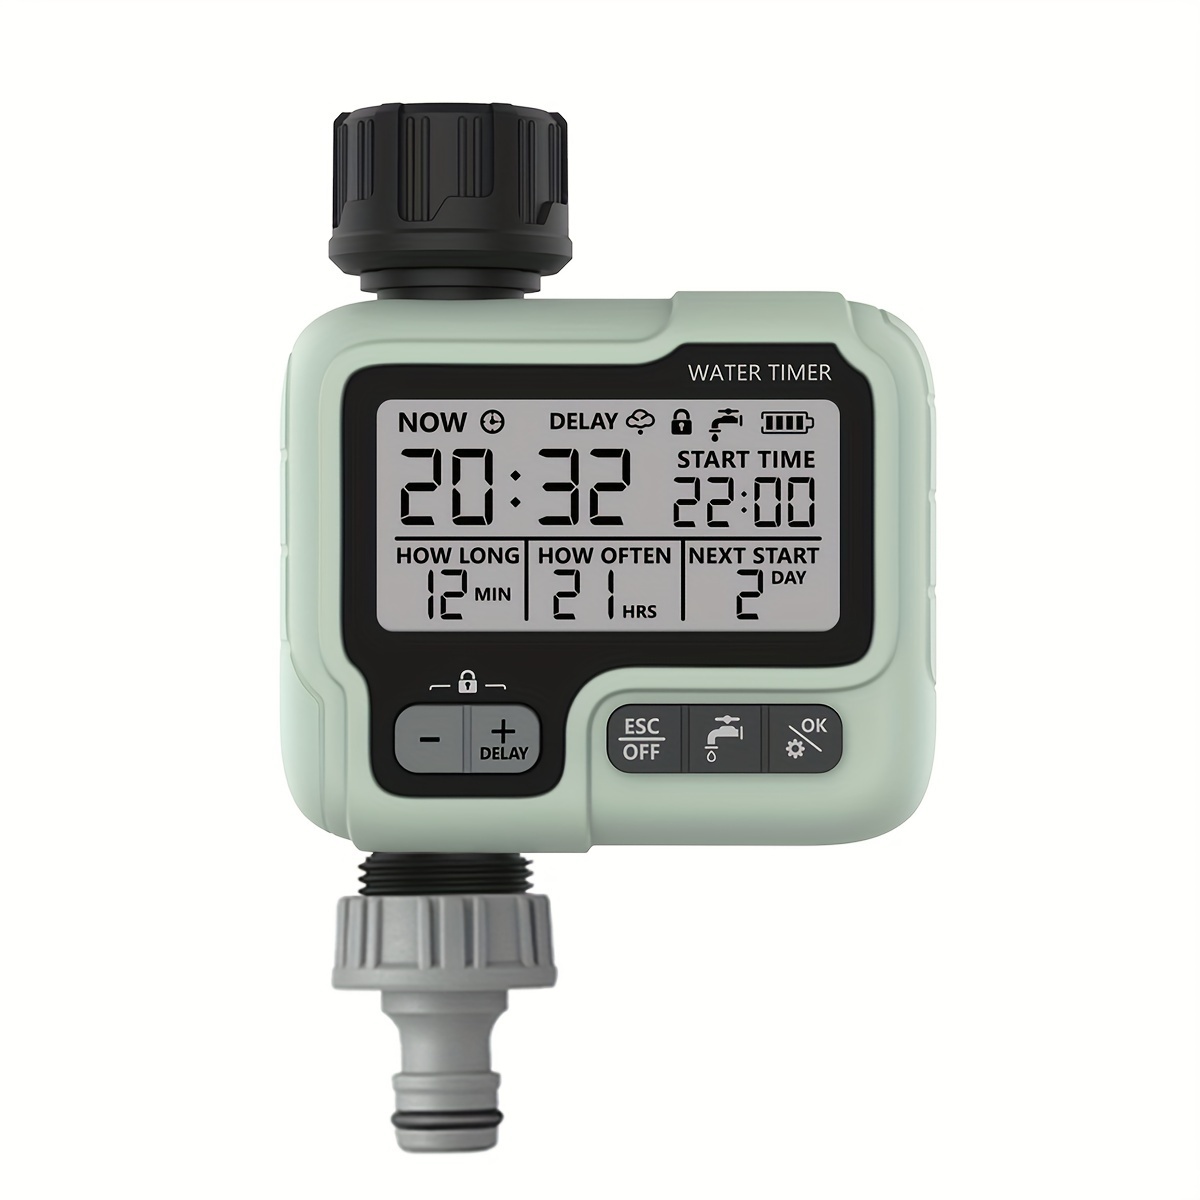 

1pc Water Timer For 3/4" Eu Connector Garden Tools Irrigation System Sprinkler Controller For All Seasons And Multiple Scenarios Compact And Portable With Complete Functions 4.9*3.9*1.9in